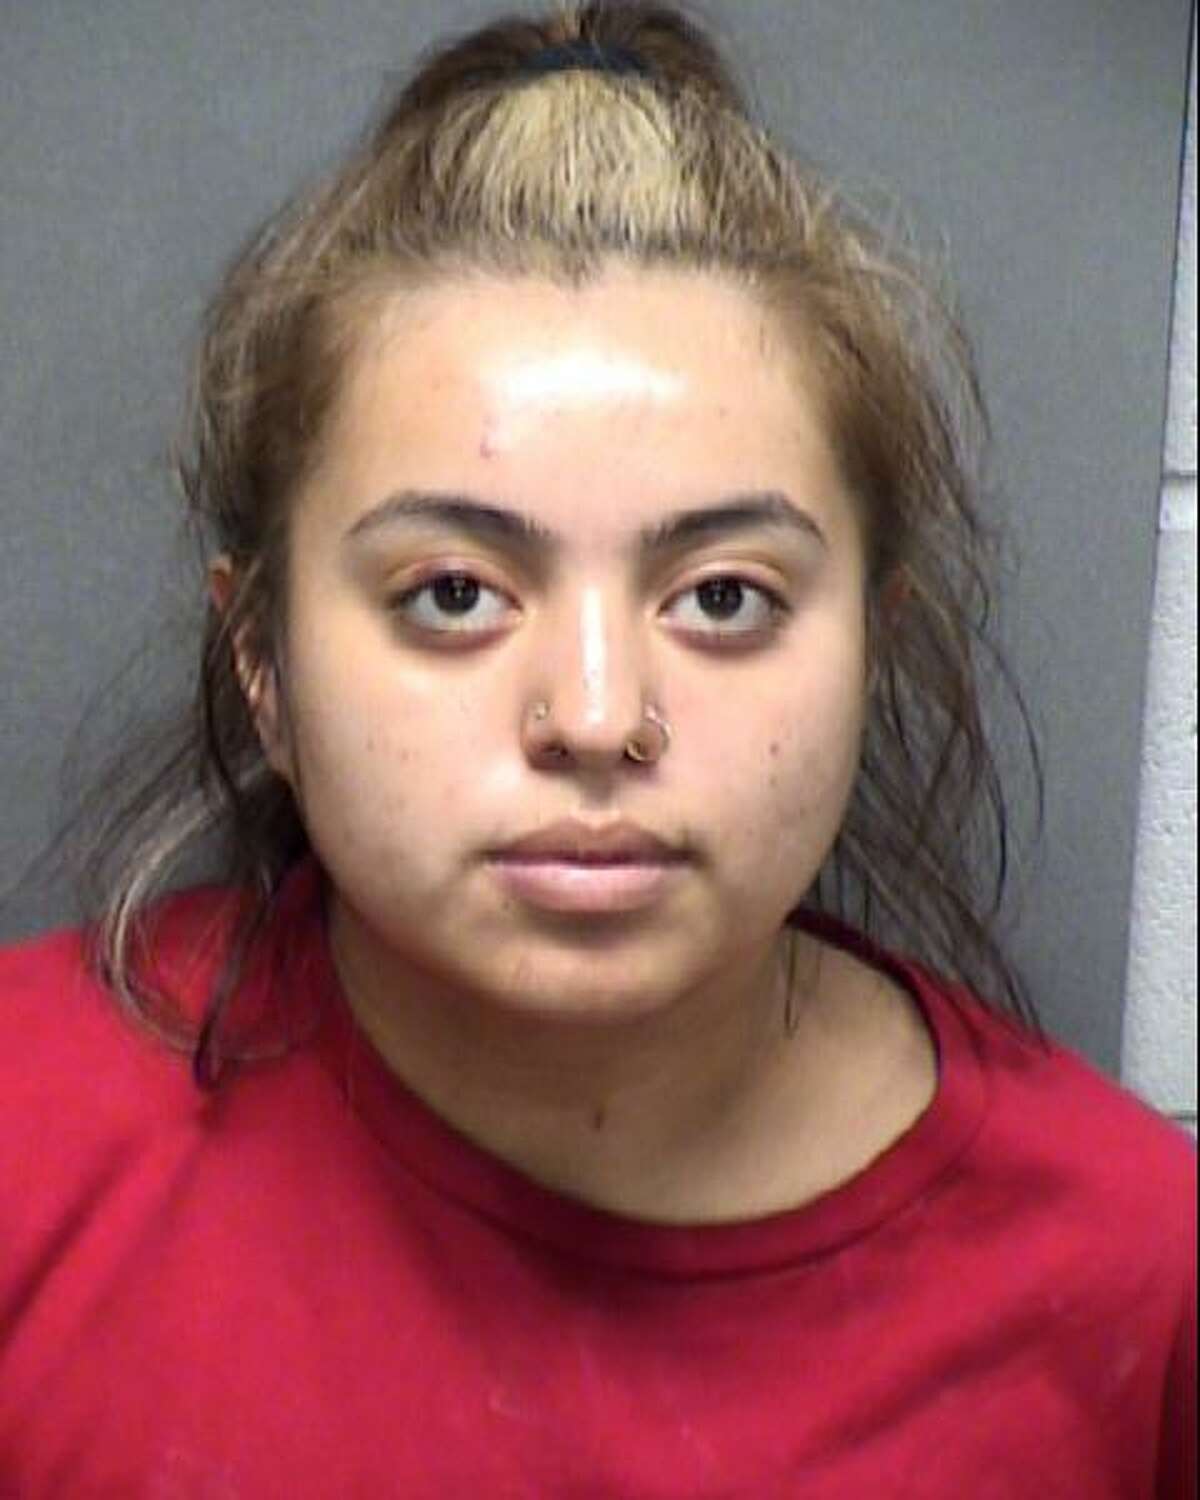 Melanie Mariah Gaiton, 18, is charged with intoxication manslaughter in the death of Monique Rodriguez, 29. Gaiton allegedly plowed into Rodriguez as she sat at a bus stop on Culebra Road.